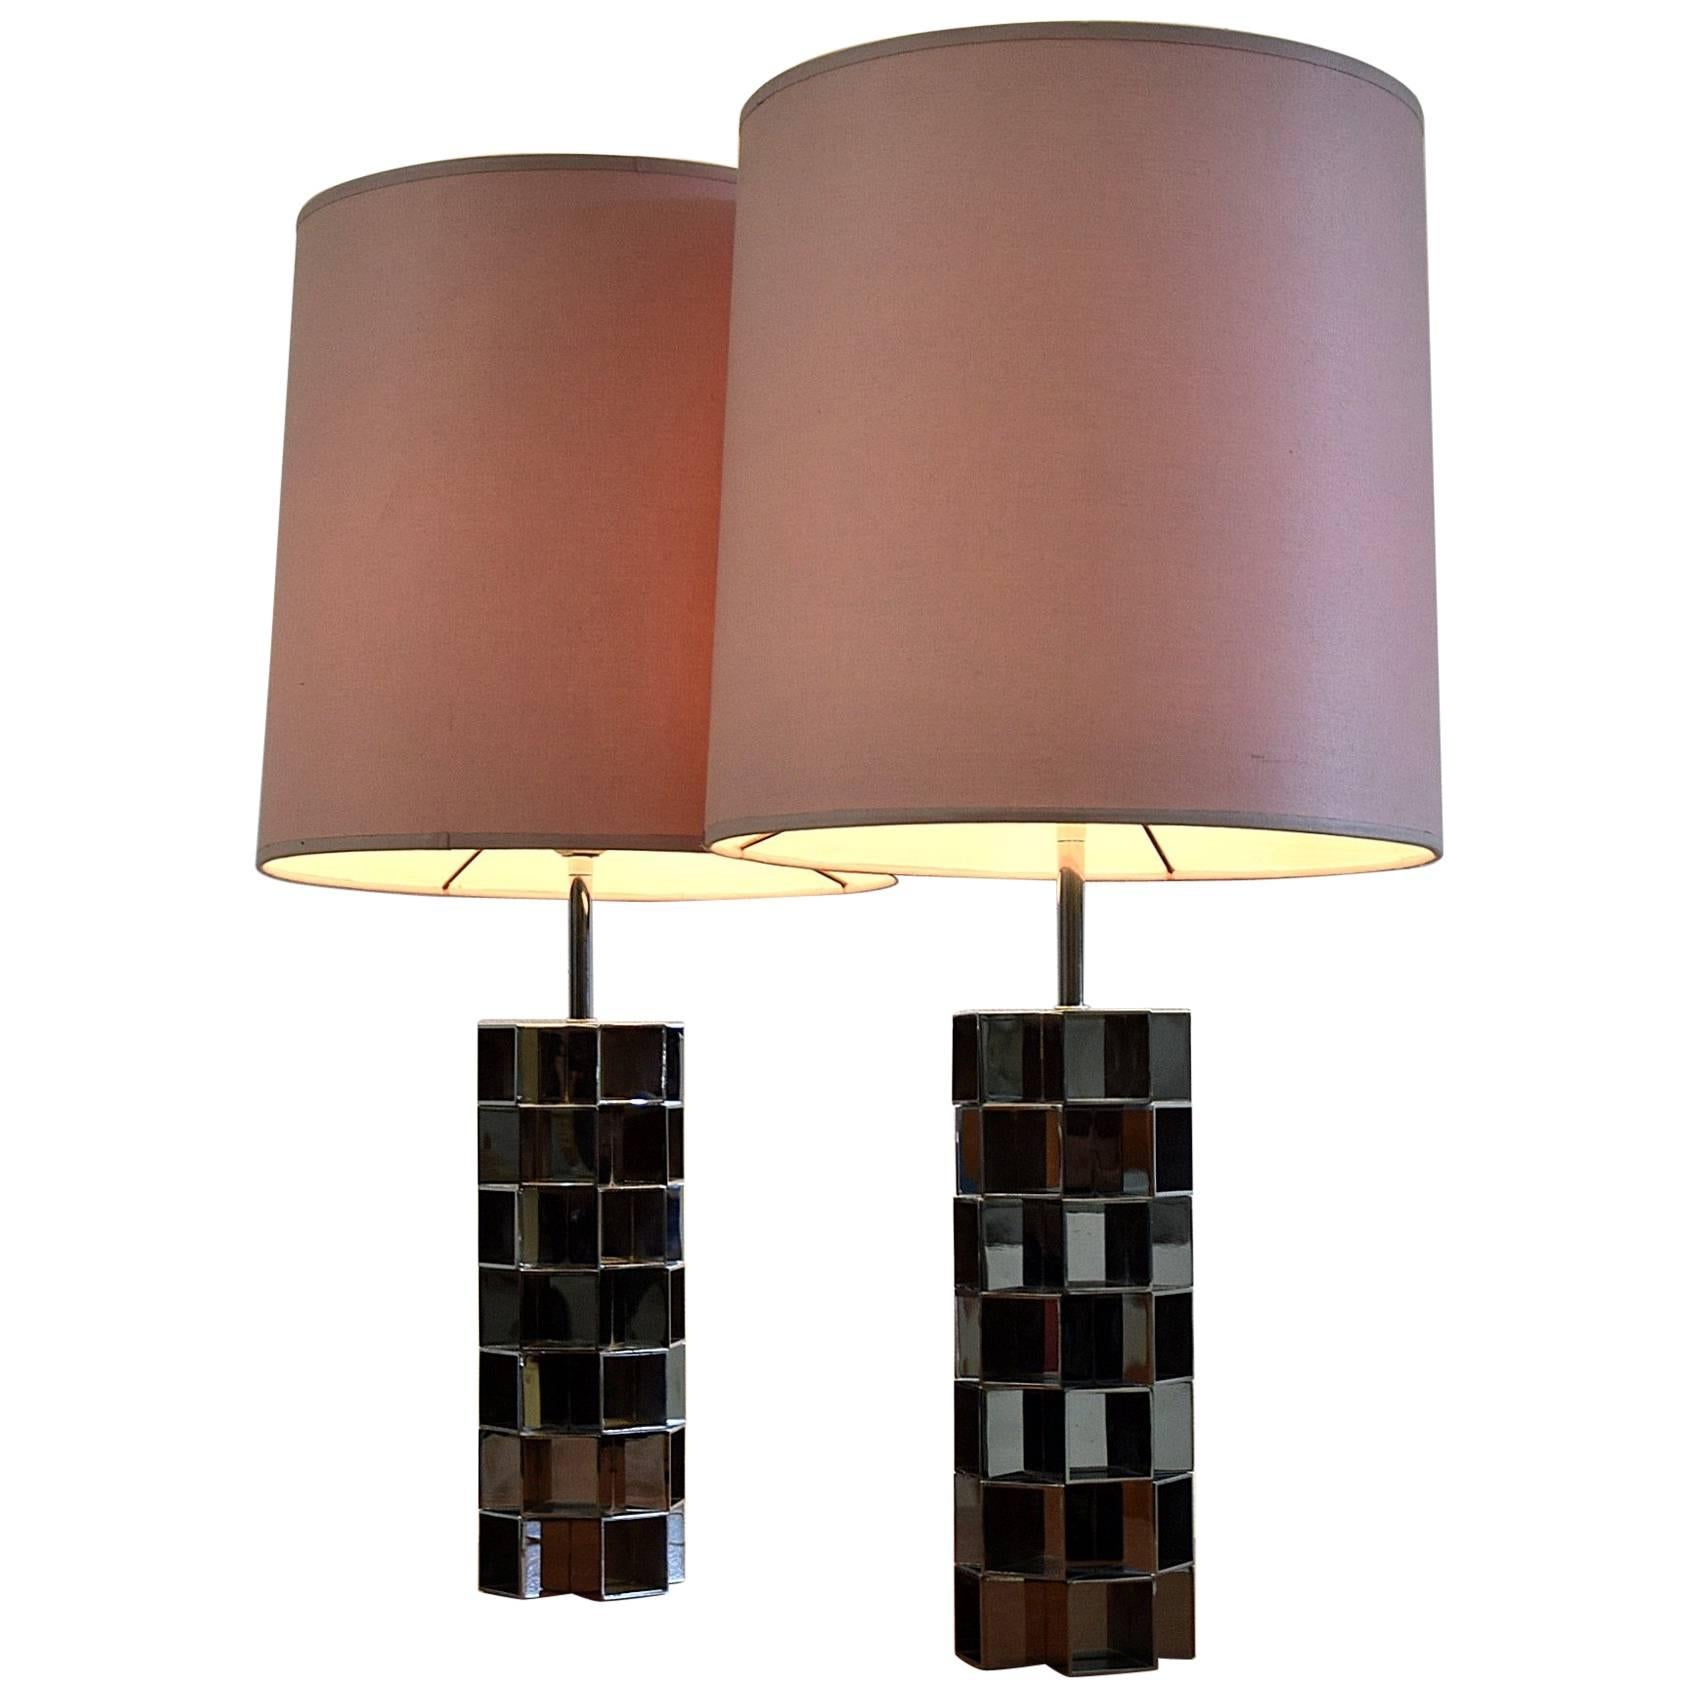 Stylish Hollywood Regency  Pair of Chrome Table Lamps